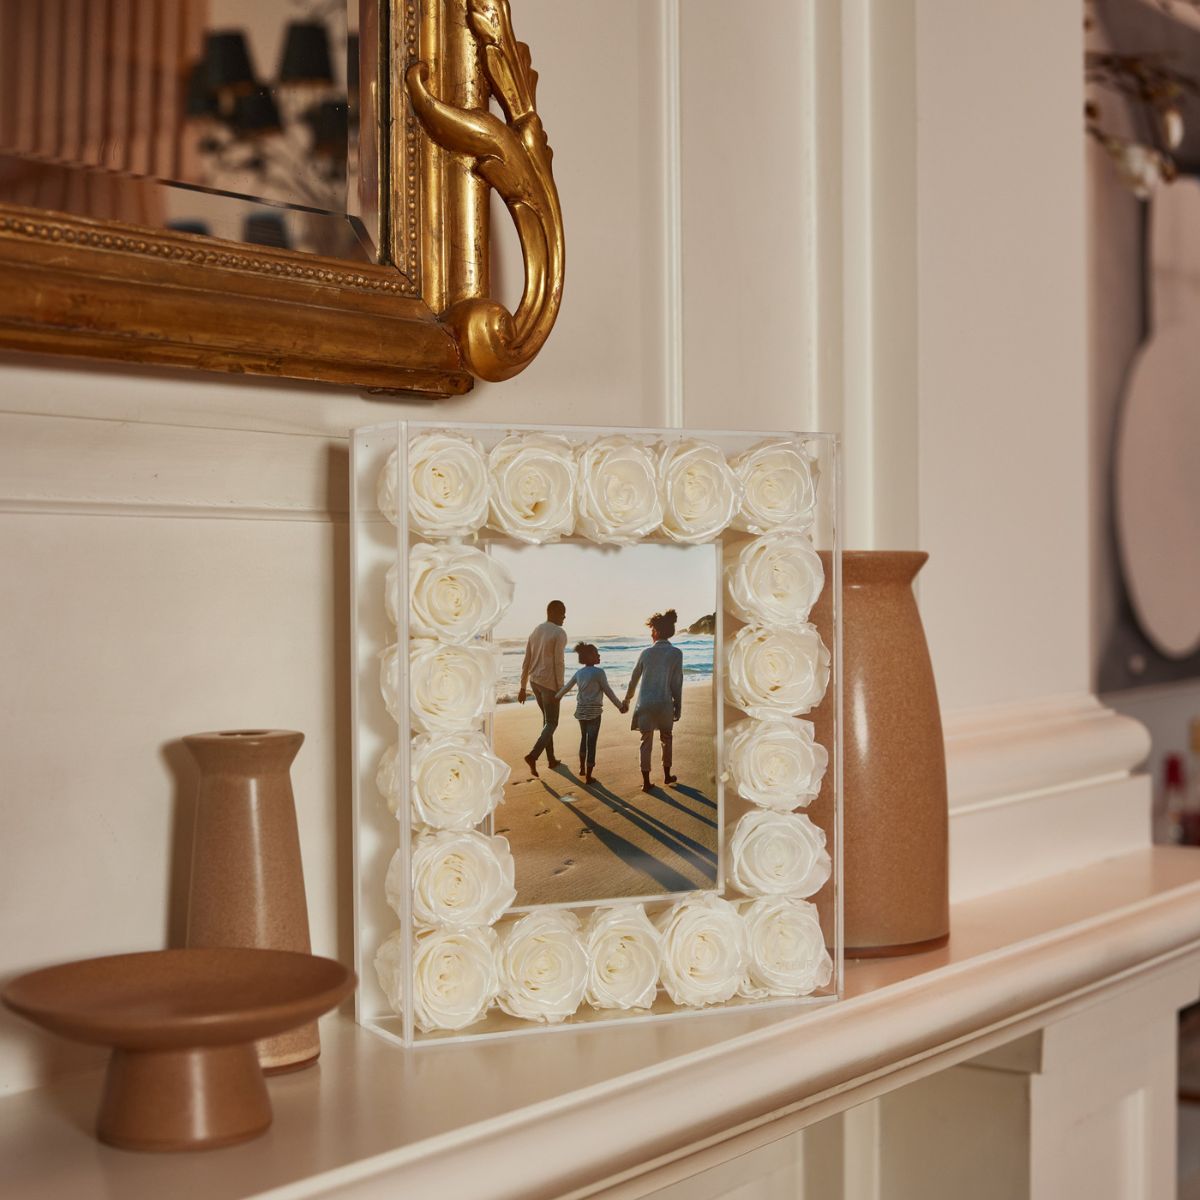 Our Fleur Picture Frame With Luxury Eternity Roses